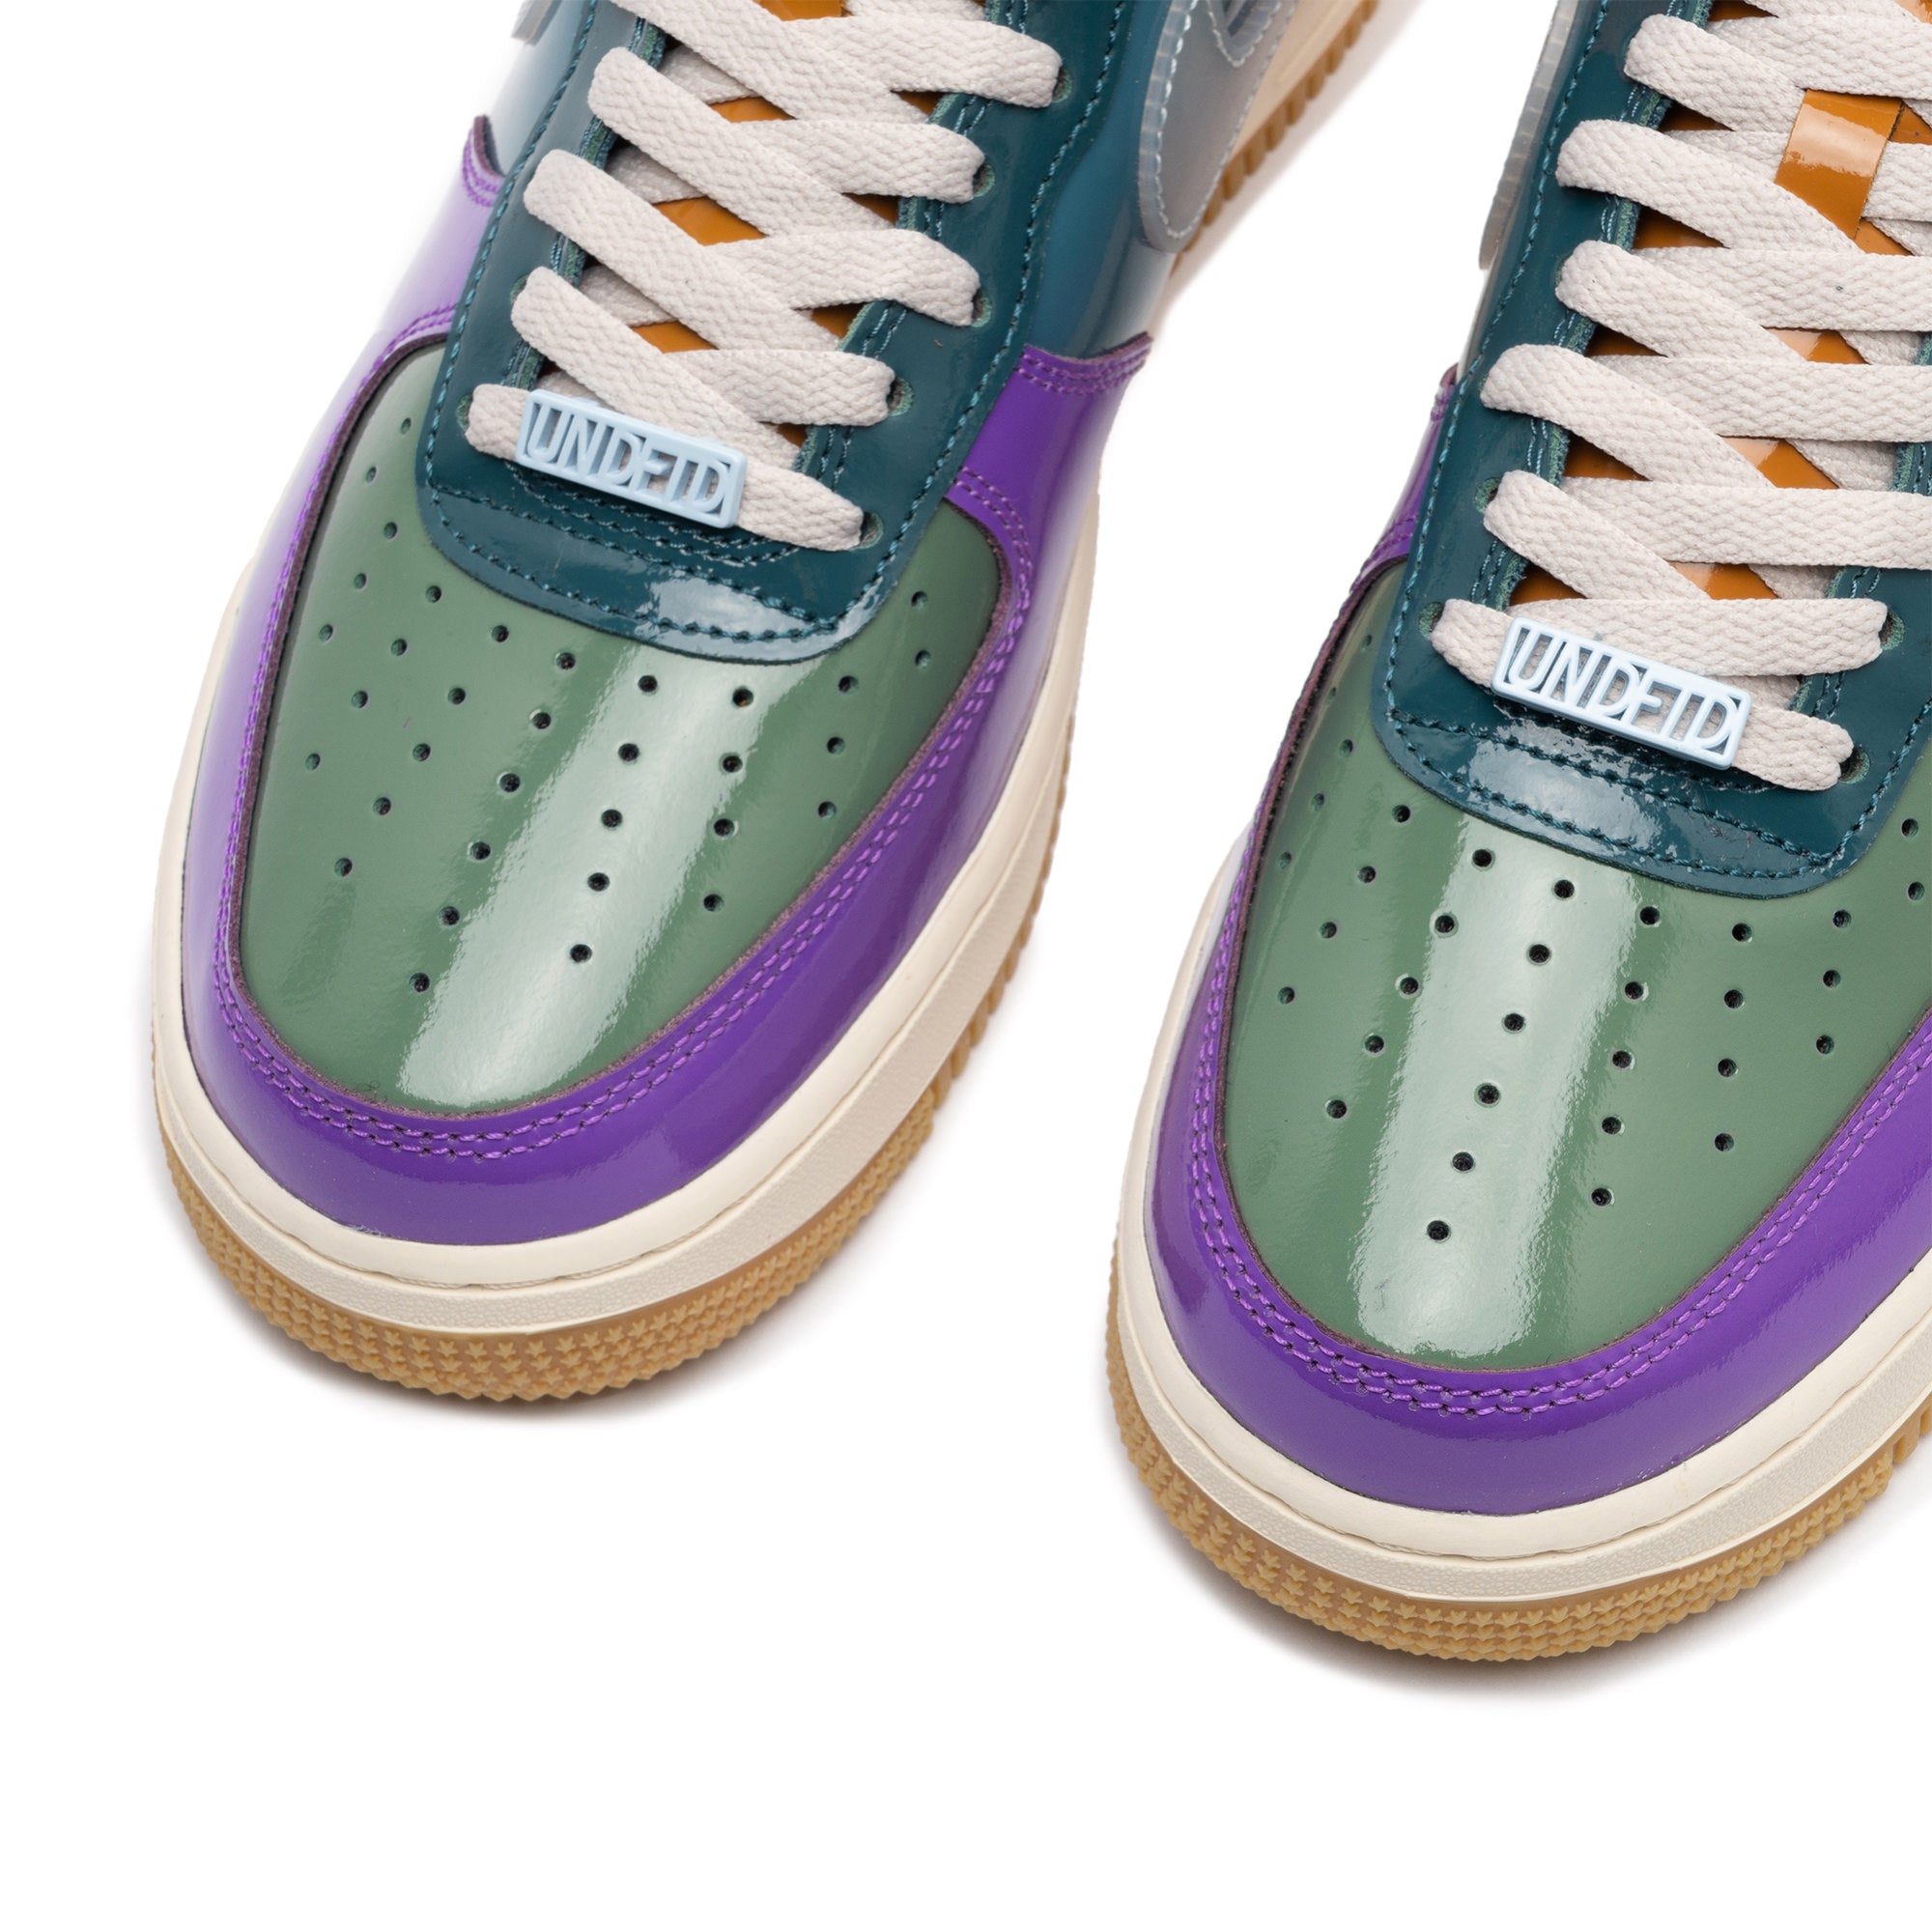 Air Force 1 Low SP DV5255-500 Wild Berry